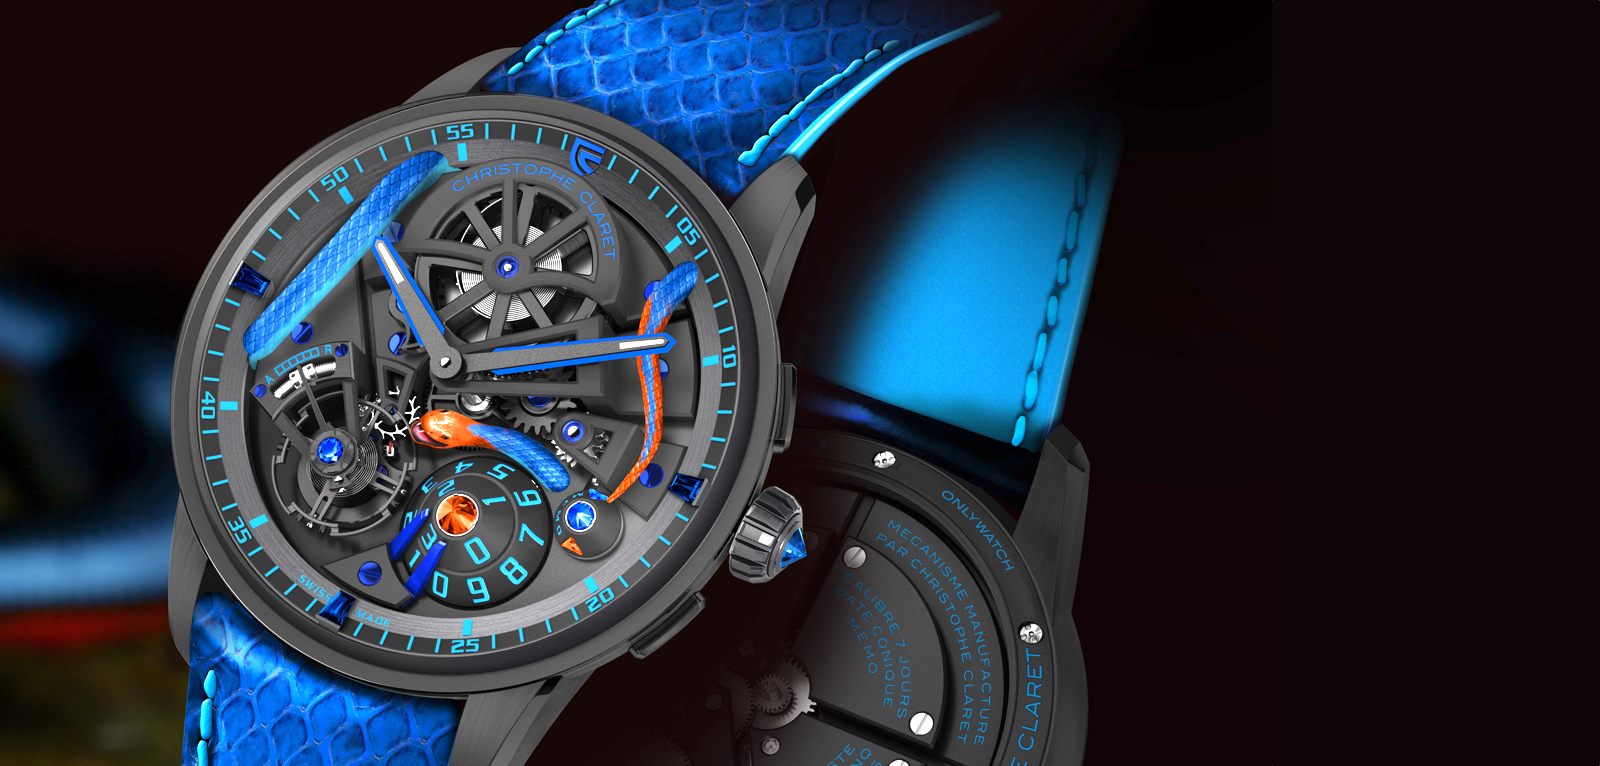 Christophe Claret OW2019 Maestro Corail Cover